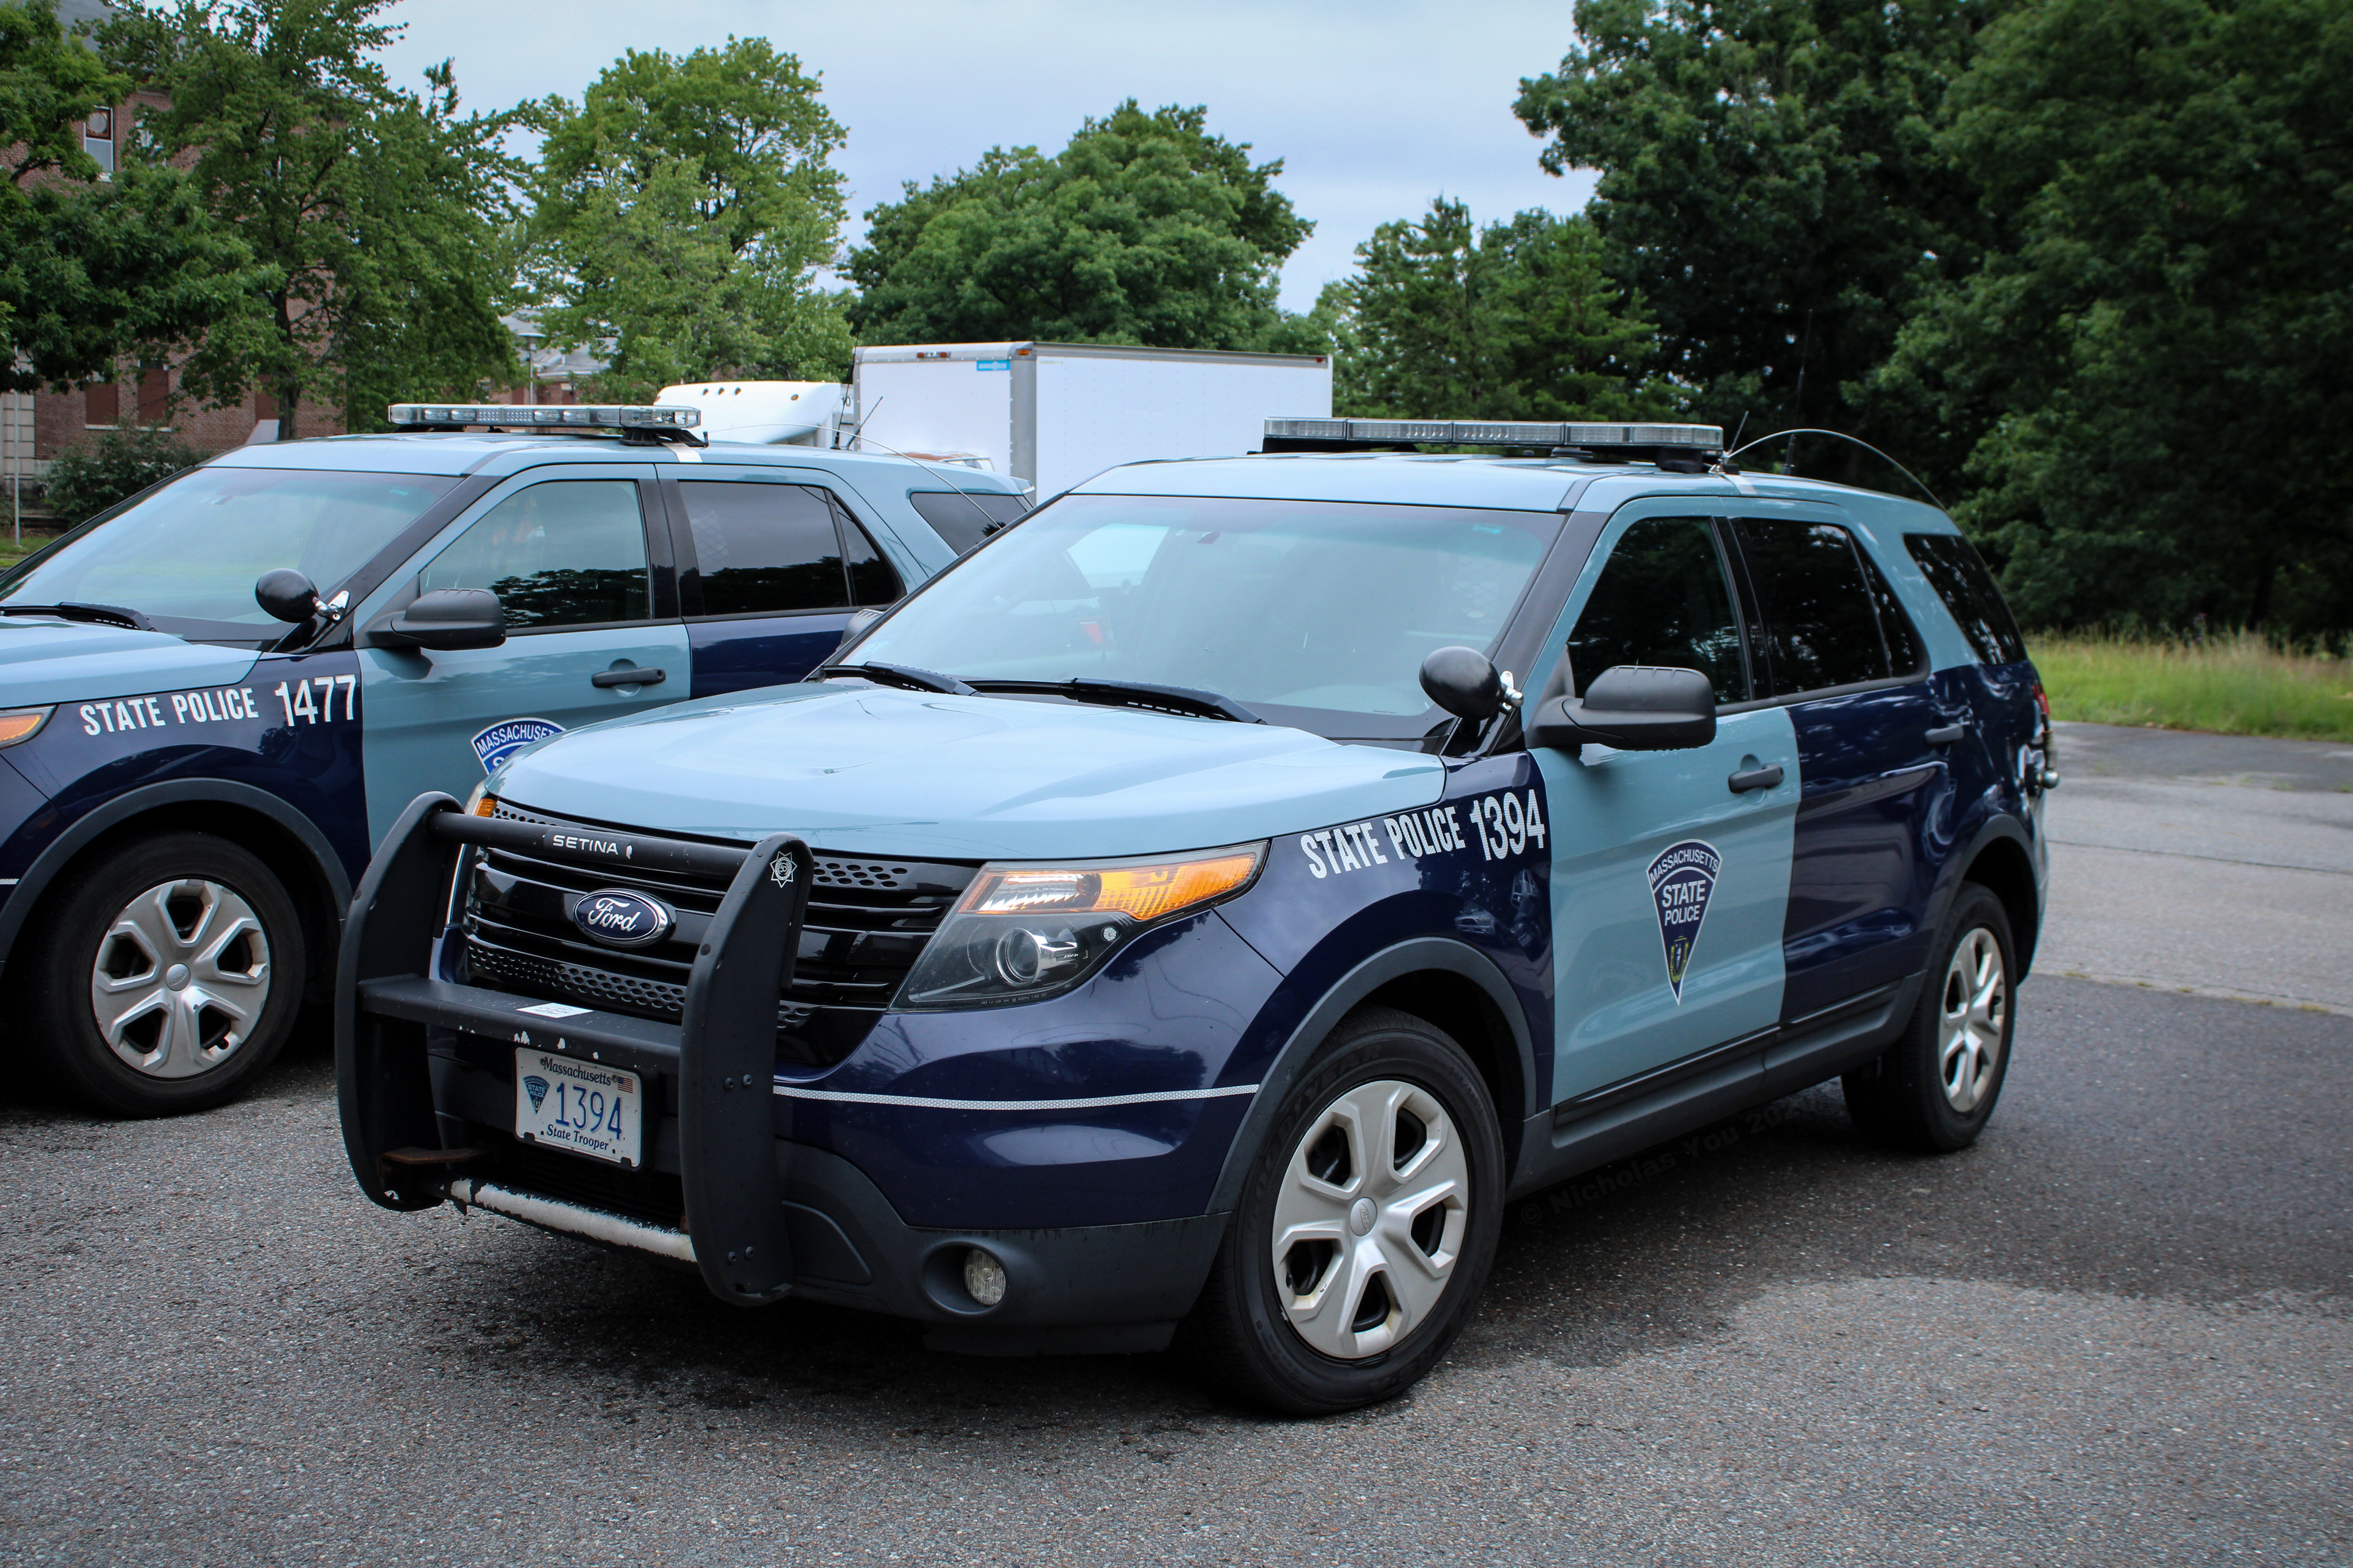 A photo  of Massachusetts State Police
            Cruiser 1394, a 2013 Ford Police Interceptor Utility             taken by Nicholas You